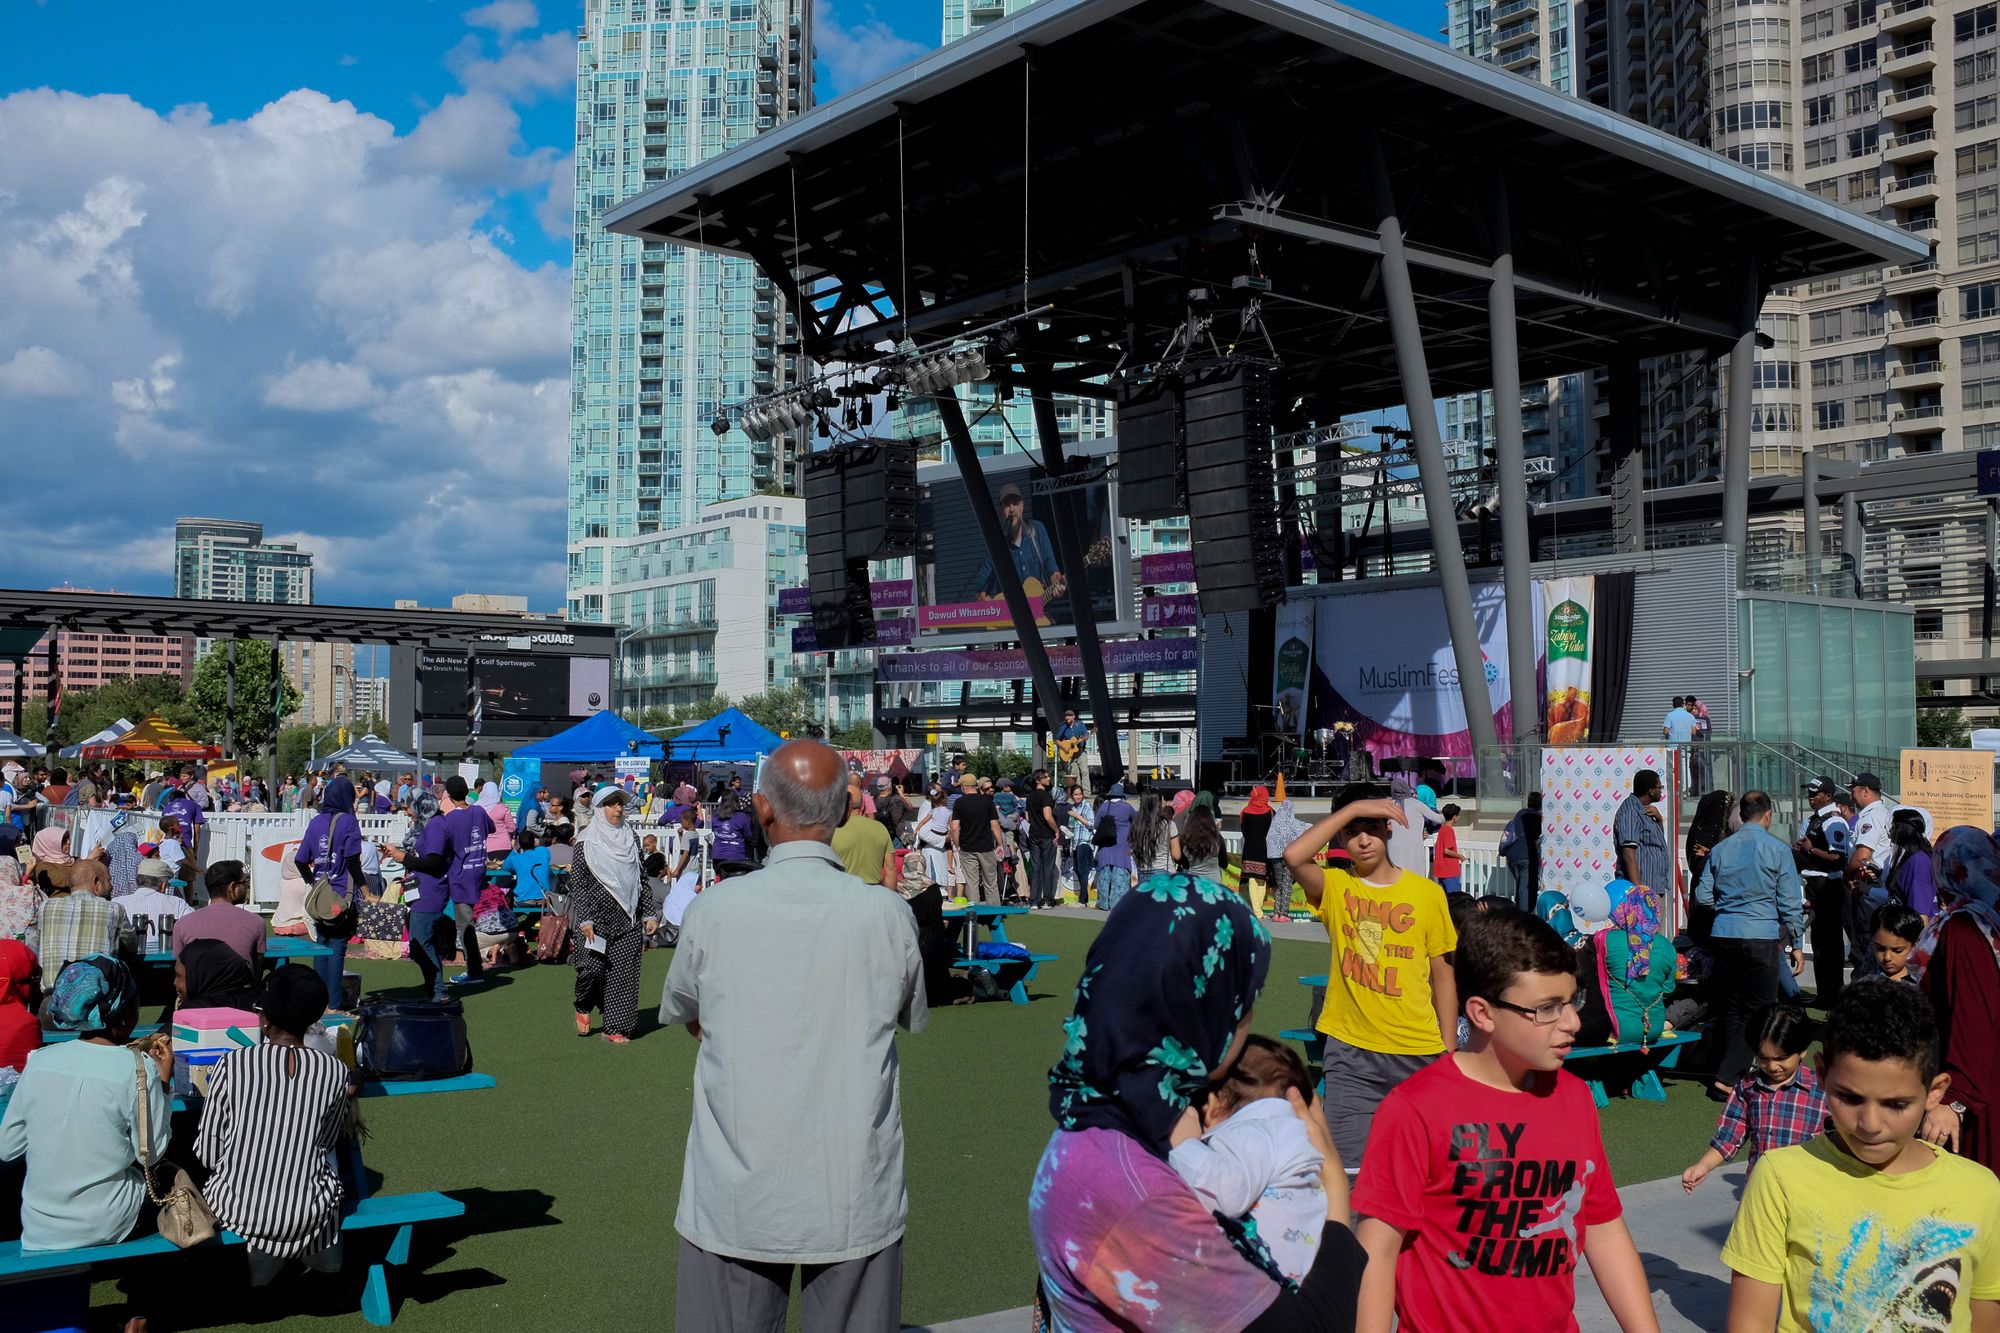 Record-breaking crowd on opening day at MuslimFest